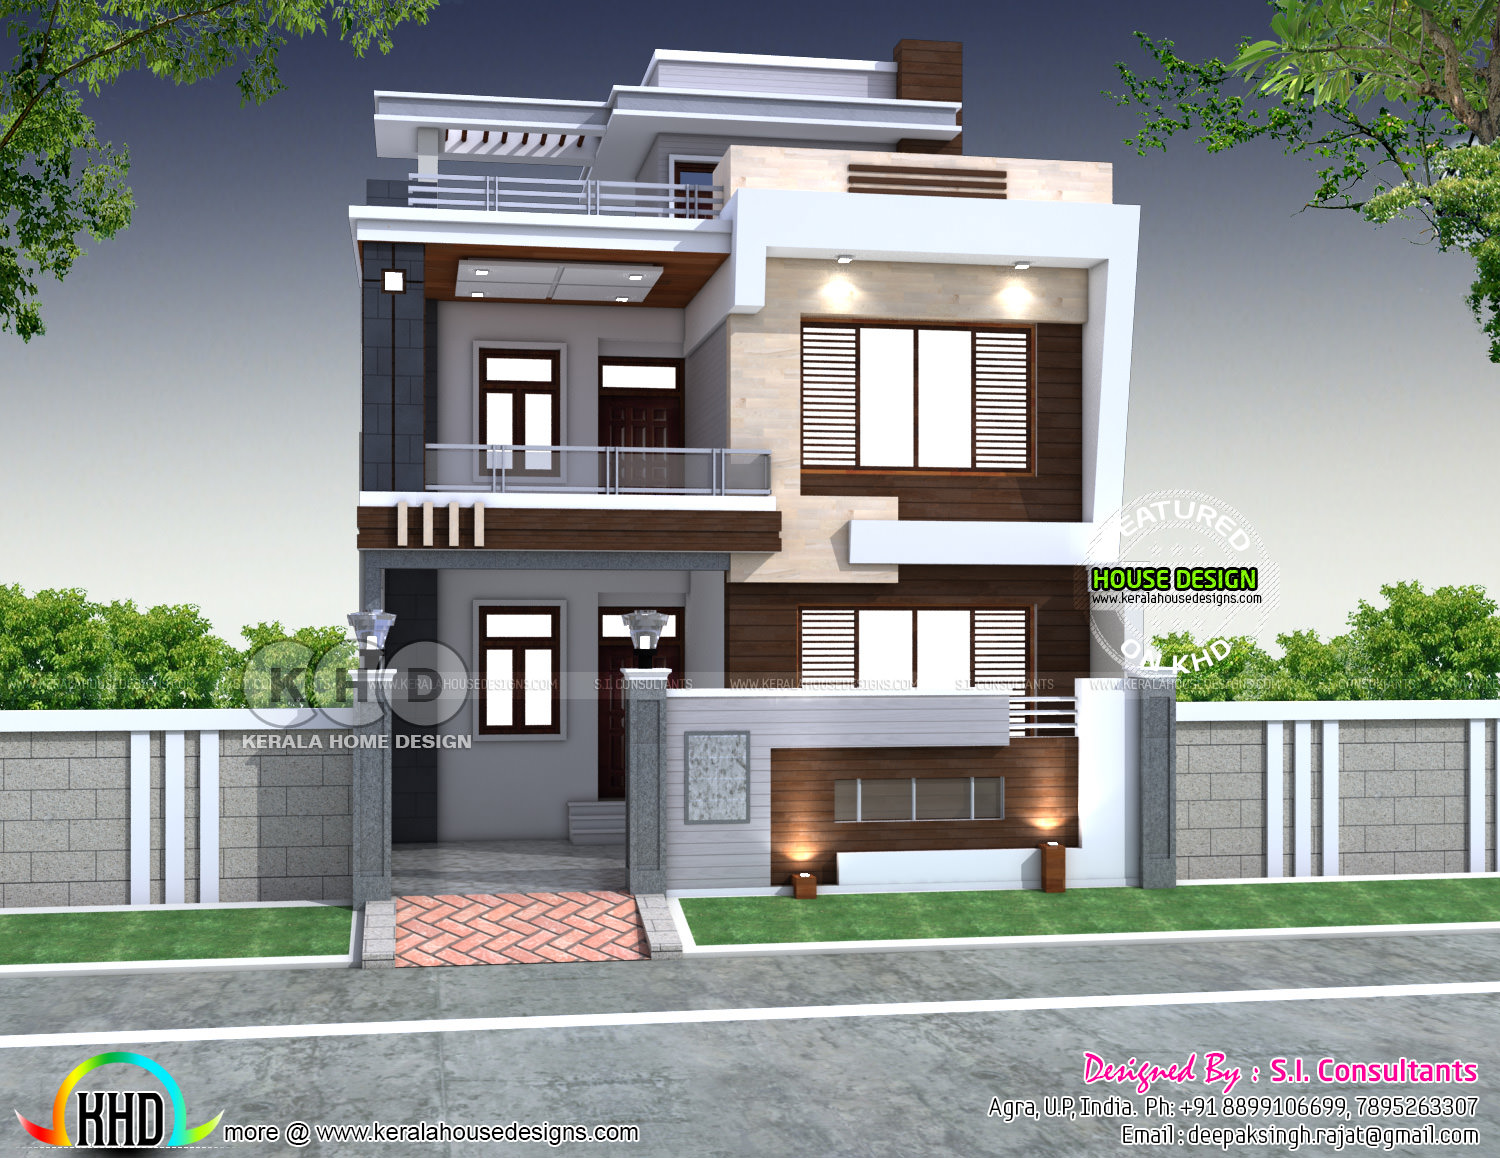 28 x 60 modern Indian  house  plan  Kerala home  design  and 